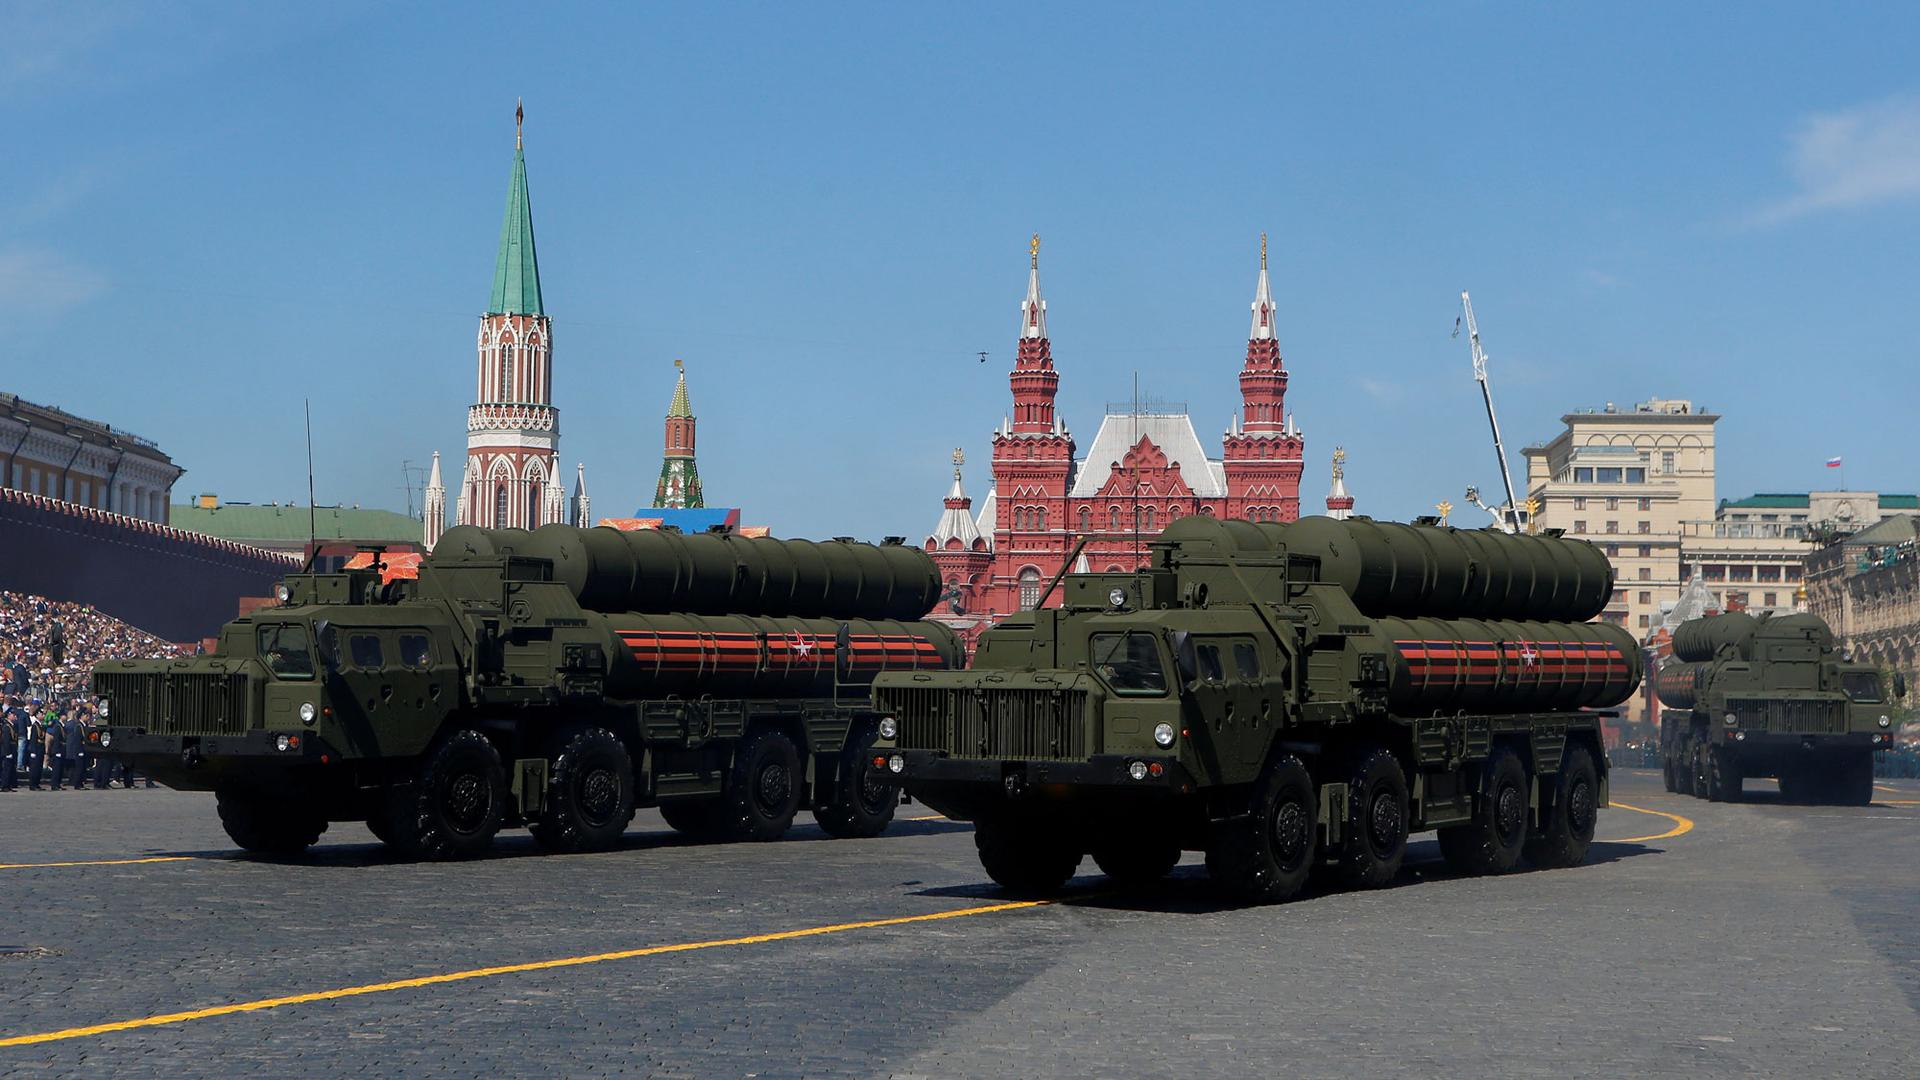 Three large 8-wheeled trucks carrying air defense systems are shown driving down a street.